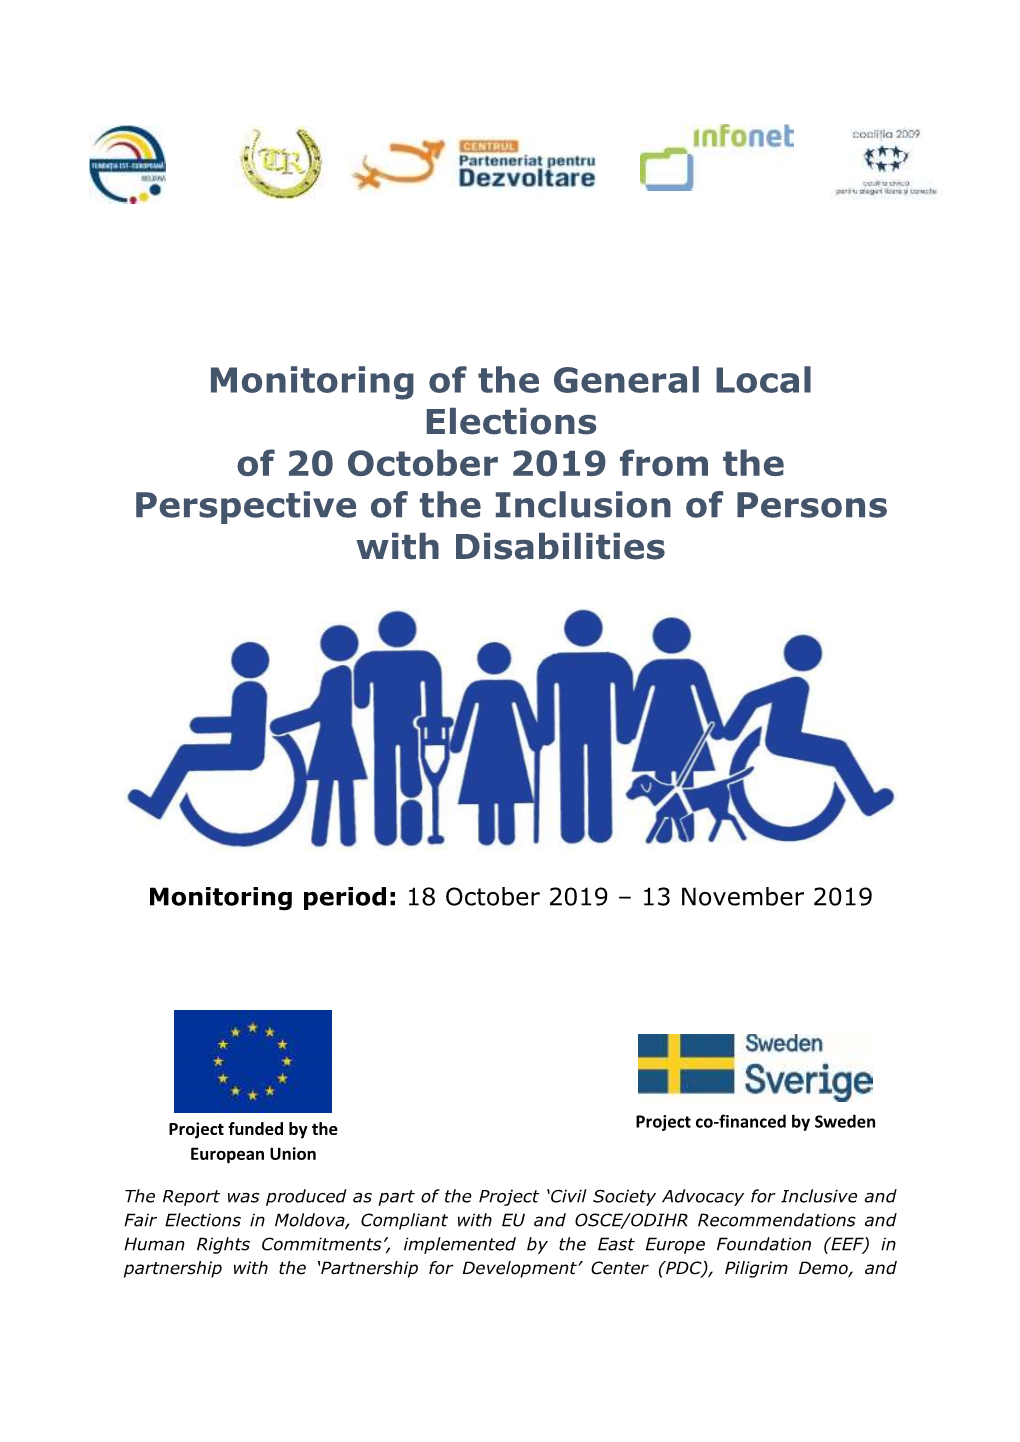 Monitoring of the General Local Elections of 20 October 2019 from the Perspective of the Inclusion of Persons with Disabilities